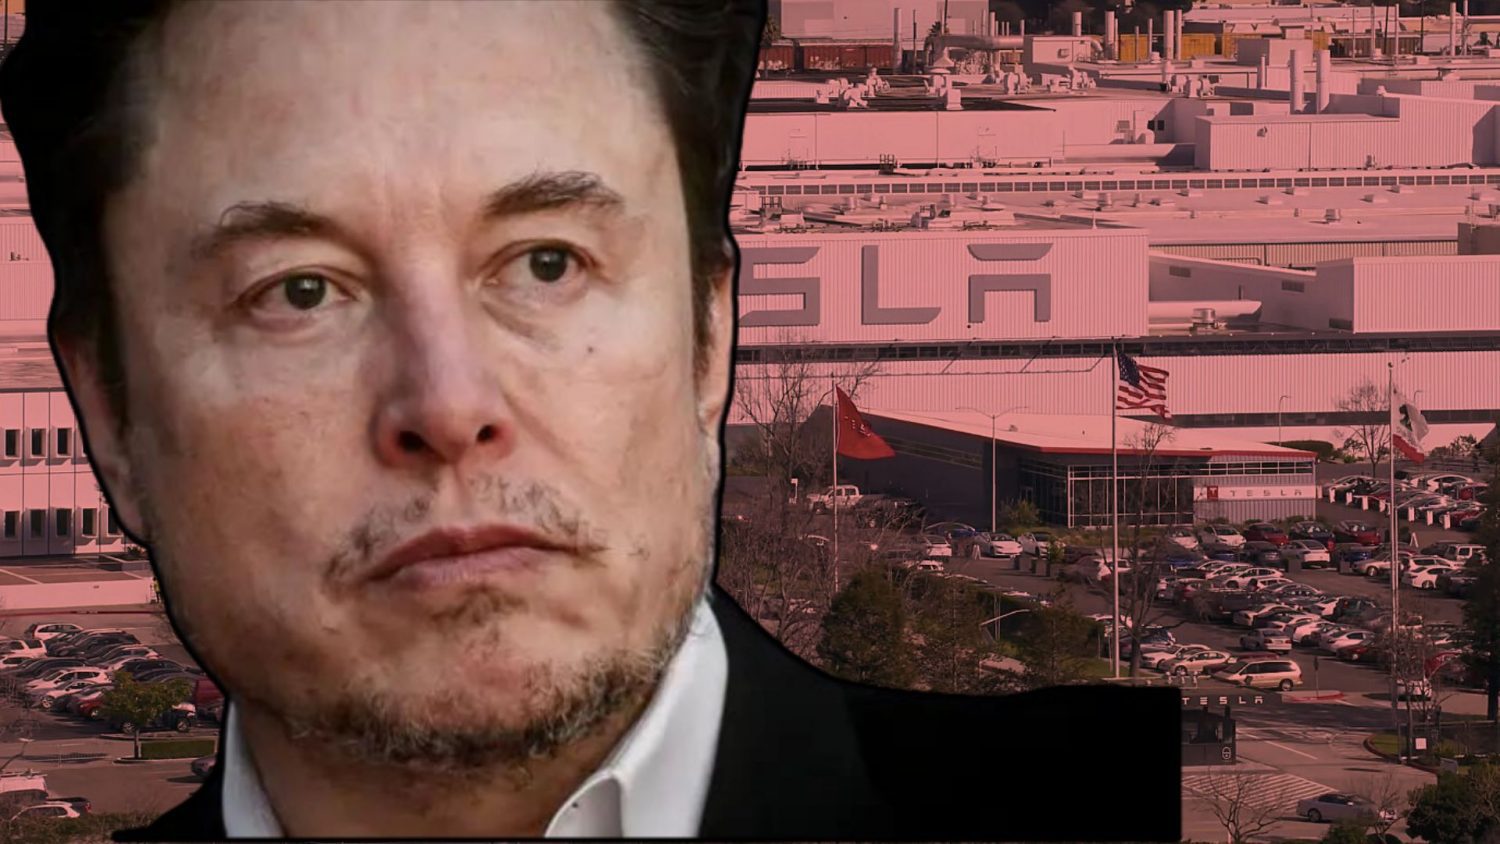 A California judge ordered Tesla to pay $1.5 million as part of a settlement for a civil lawsuit accusing them of mishandling hazardous waste.